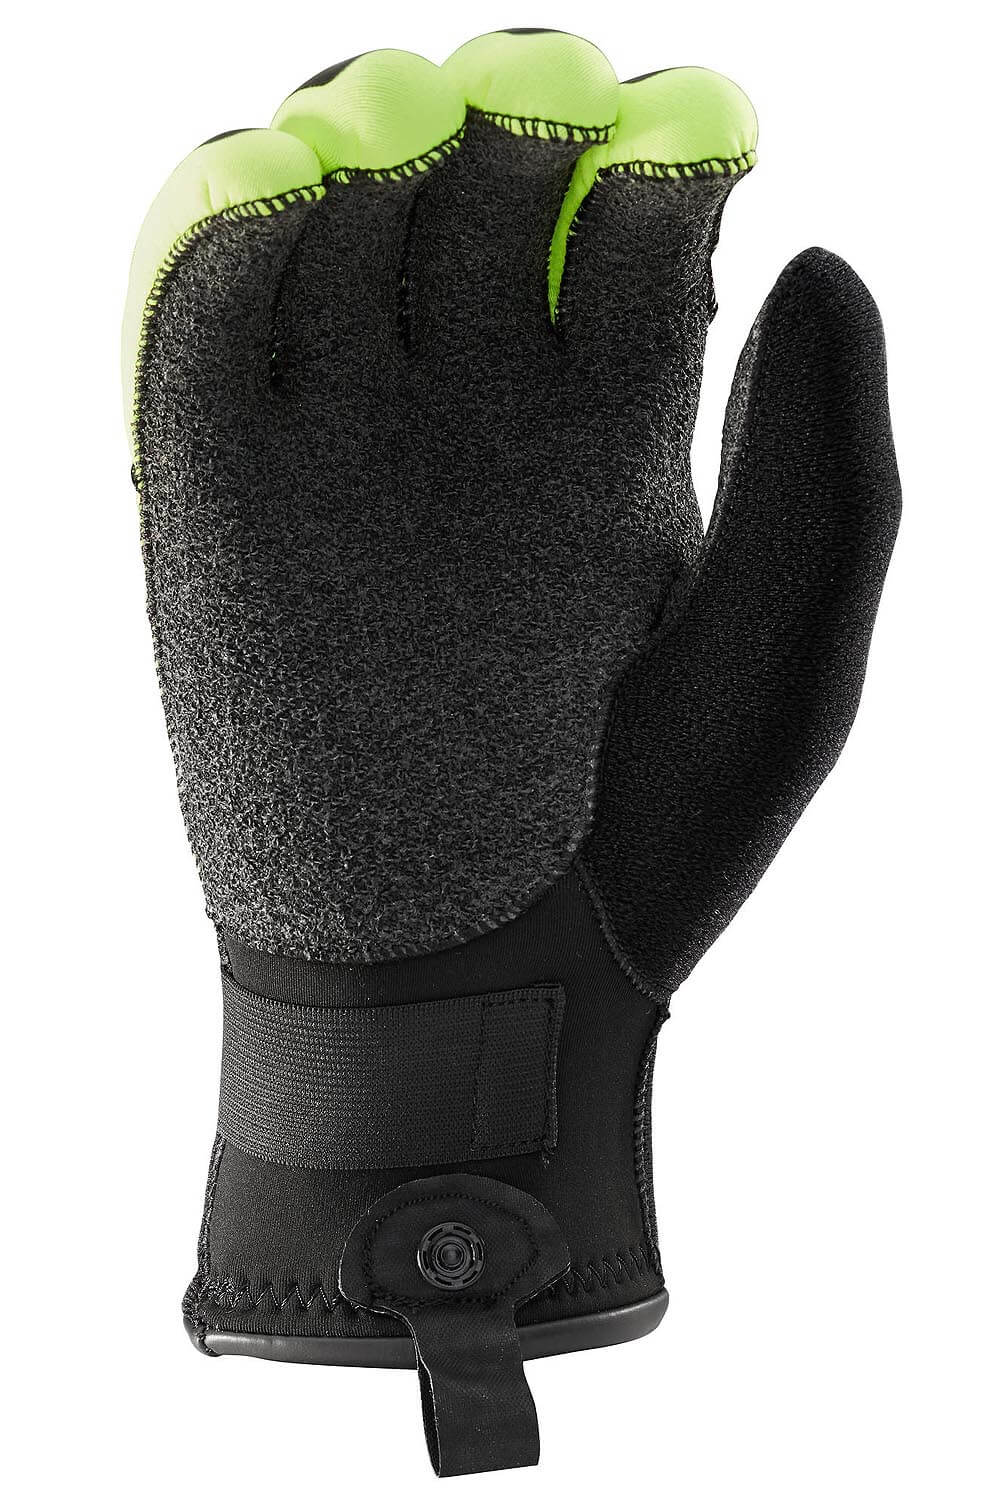 3mm NRS REACTOR Rescue Gloves